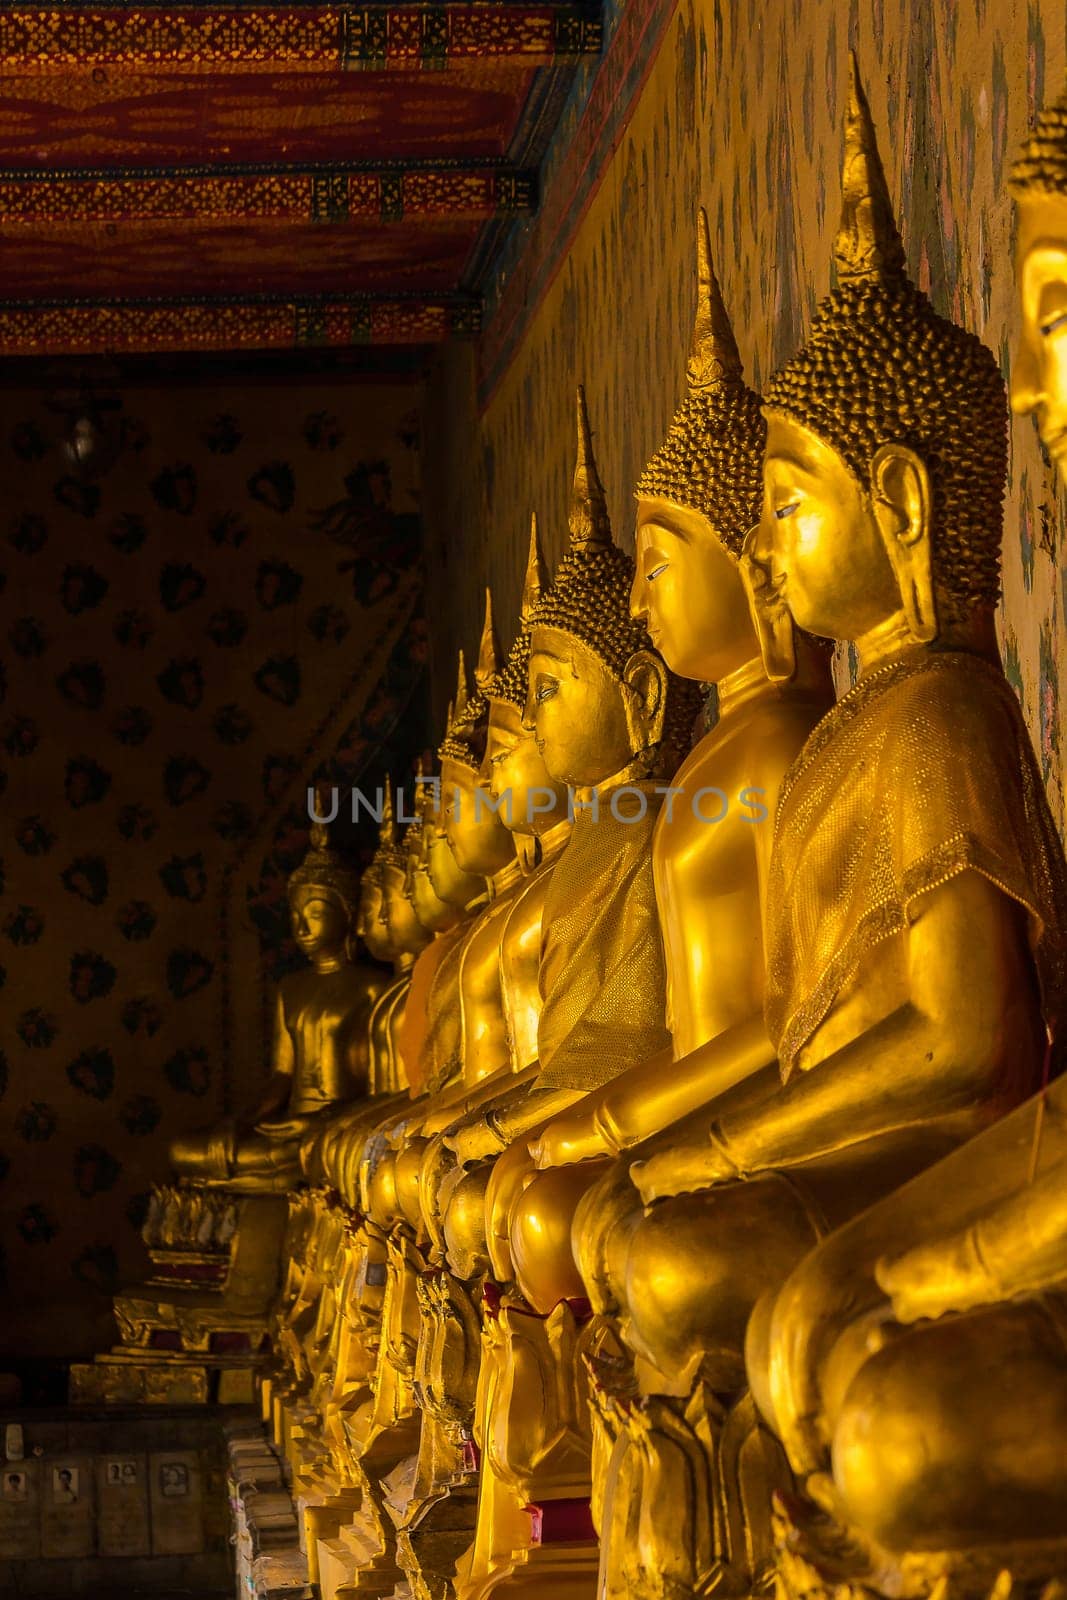 Golden Buddha statue on the pedestal with old walls